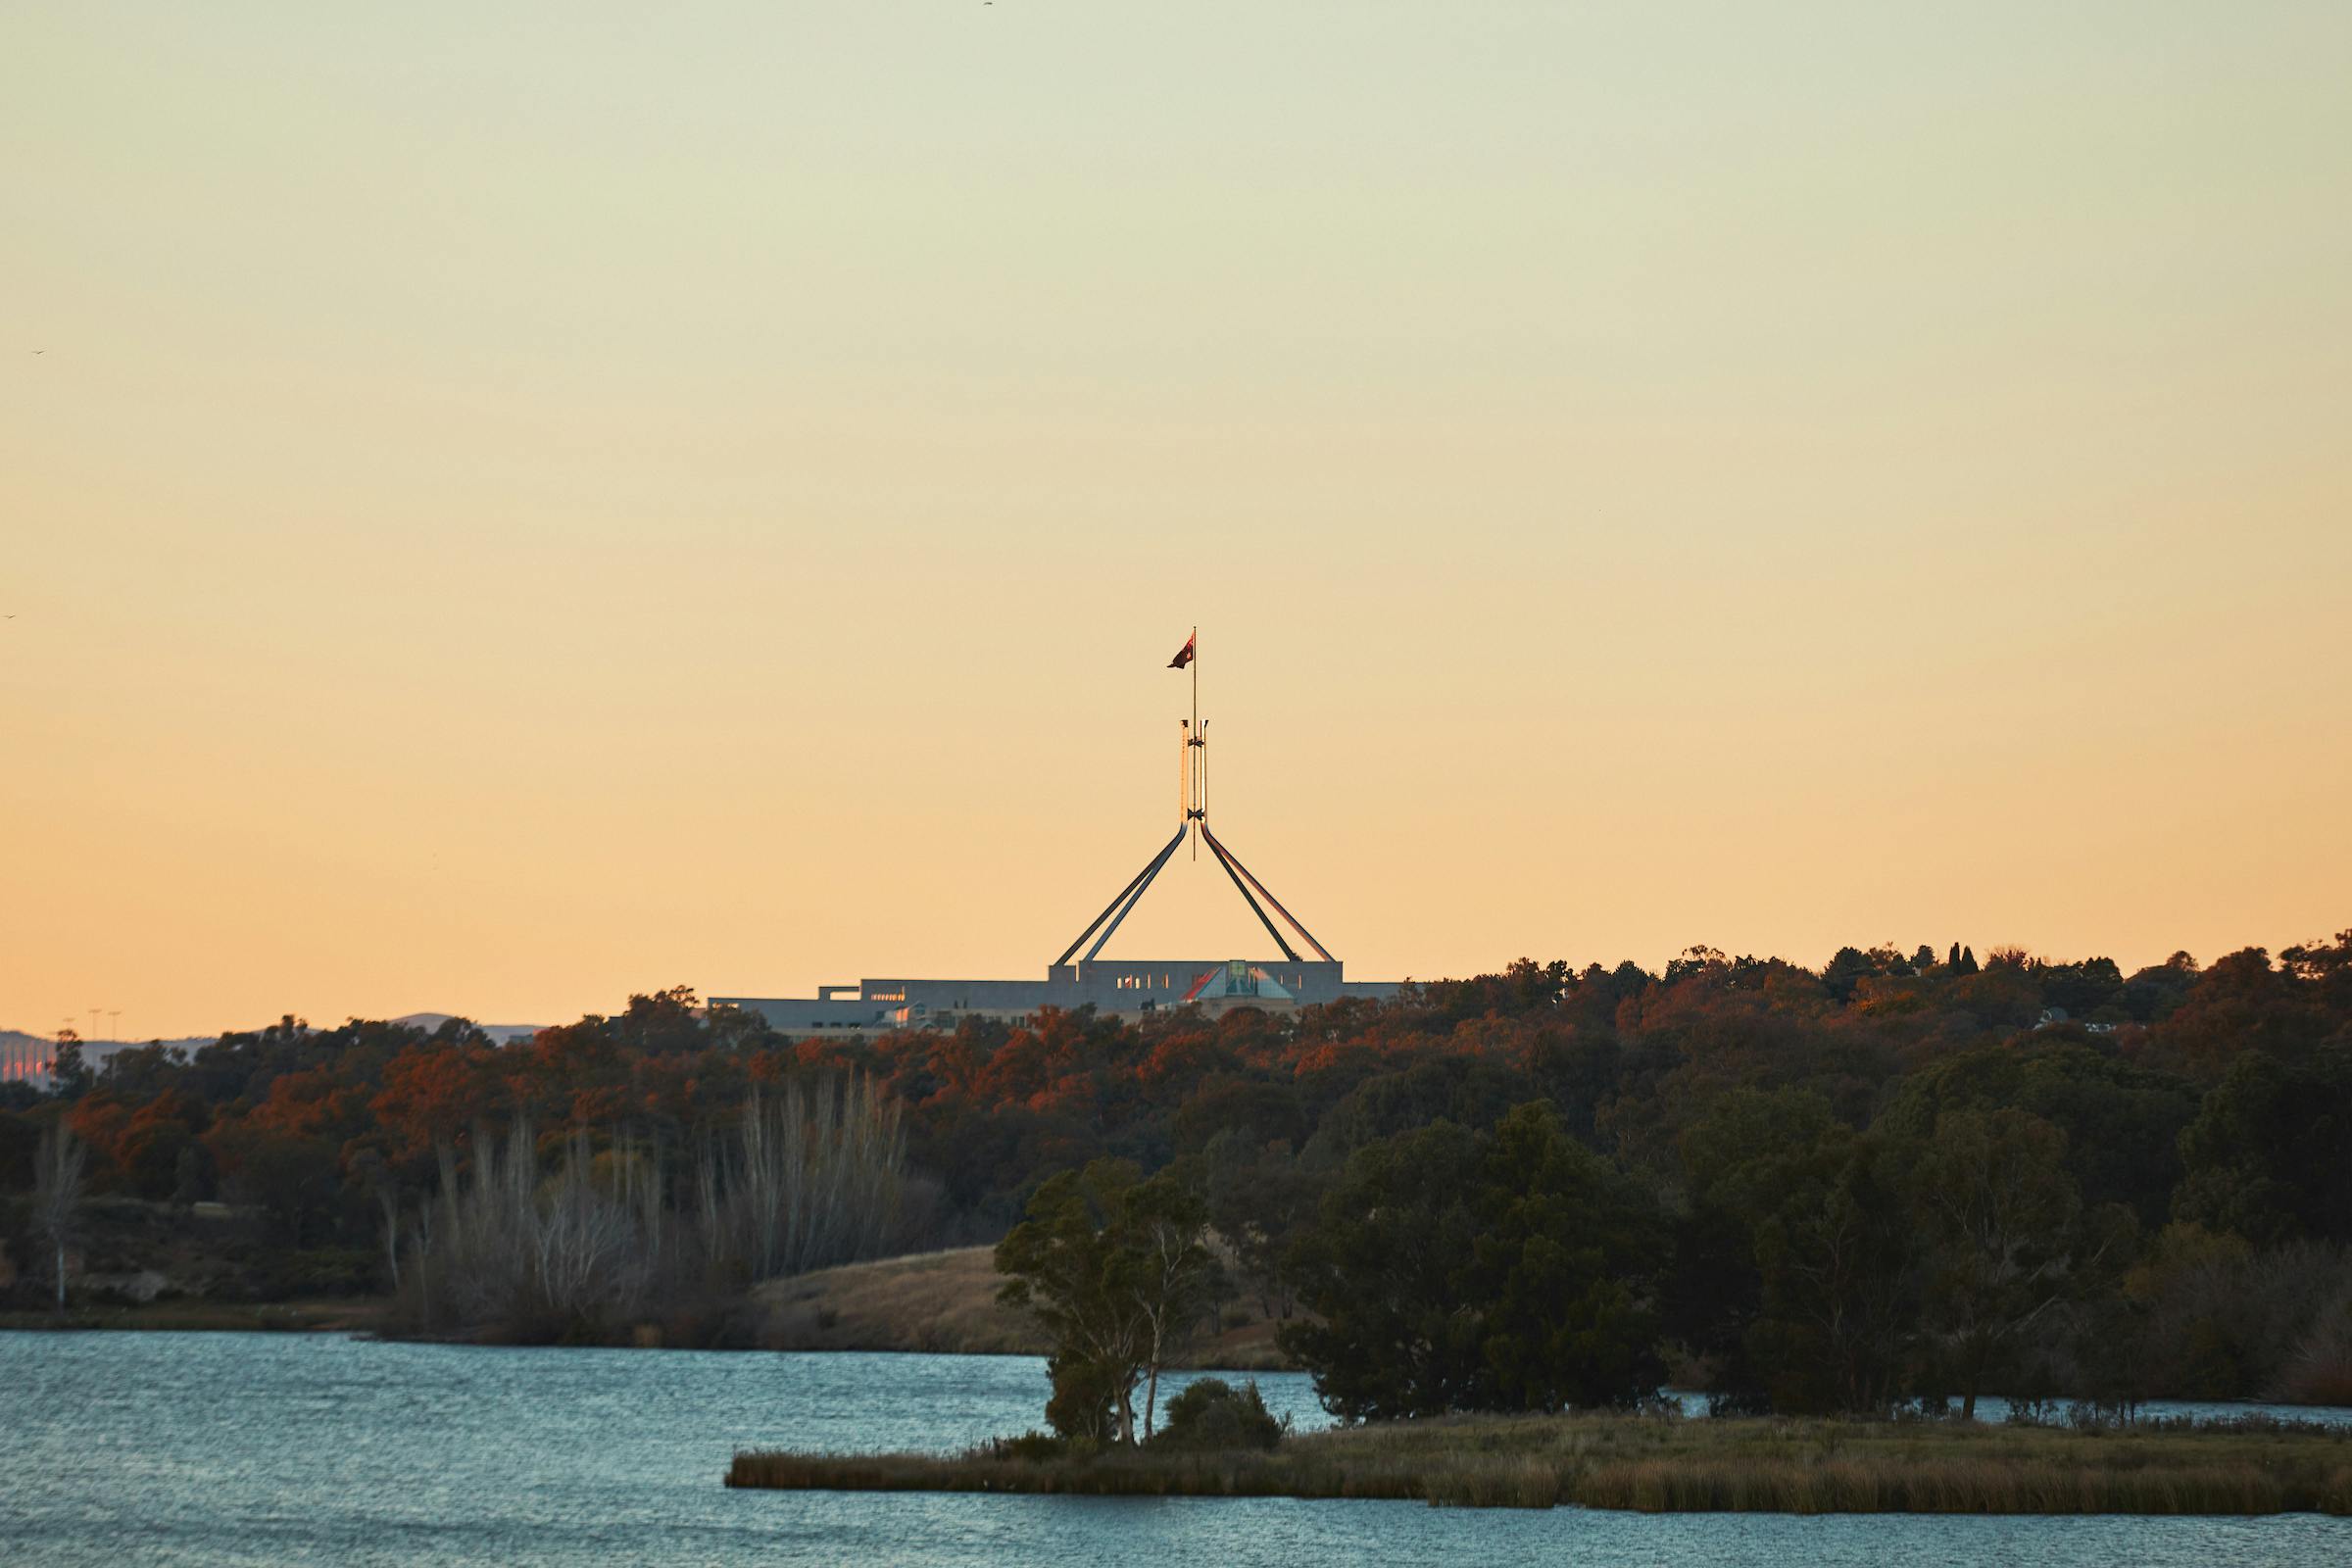 Parliament house with a flag flying on top is visible behind a lake at dusk